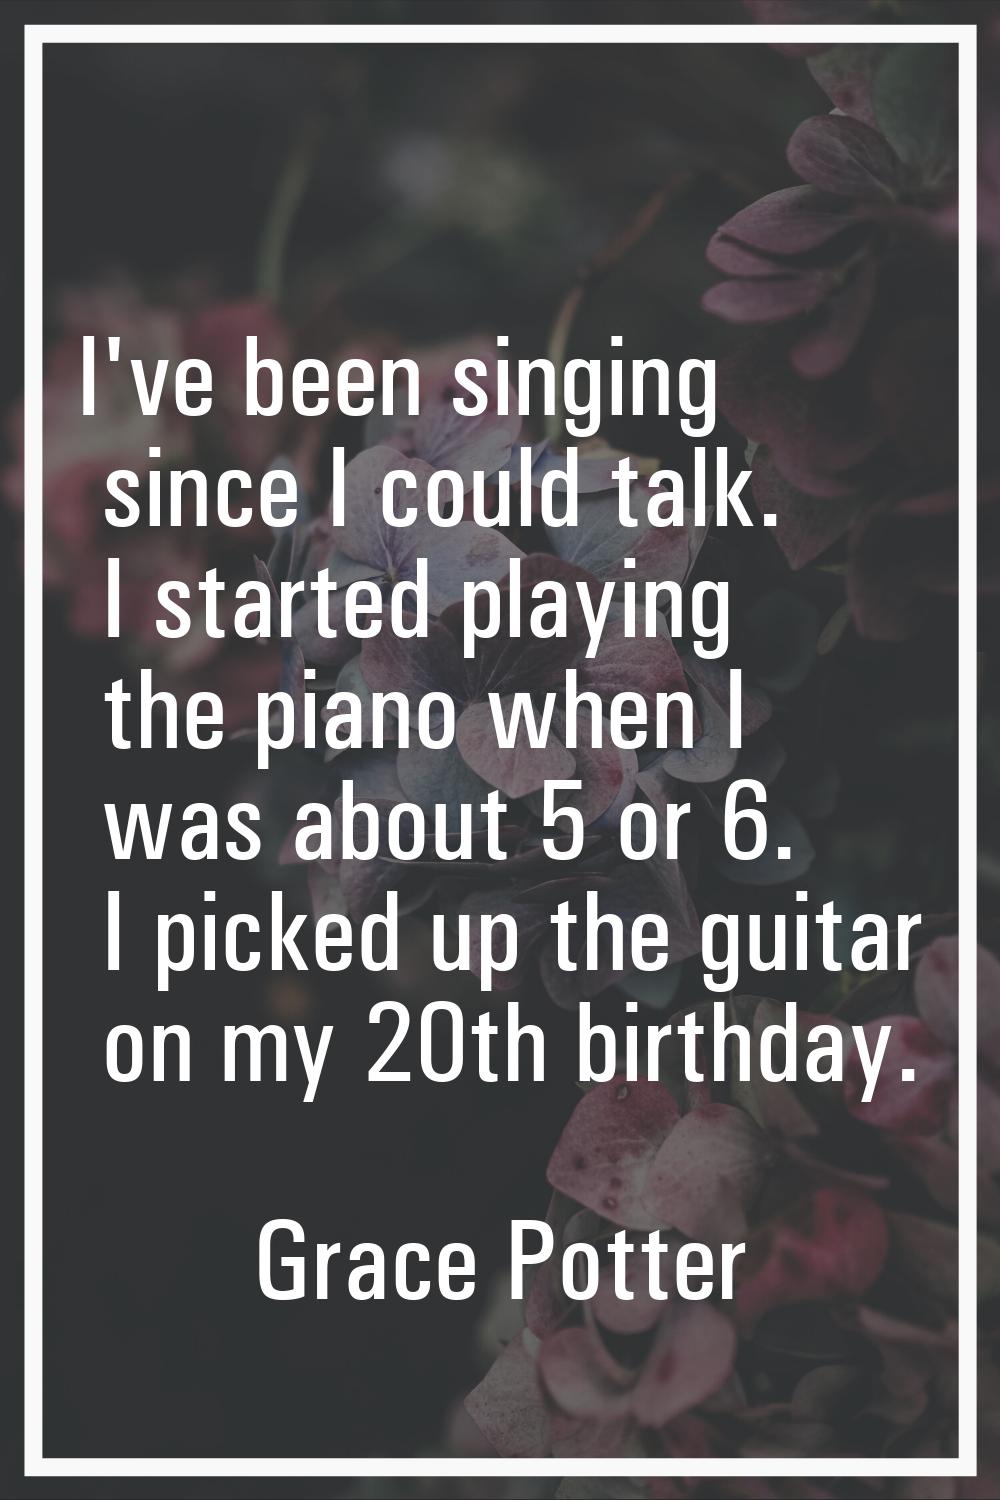 I've been singing since I could talk. I started playing the piano when I was about 5 or 6. I picked